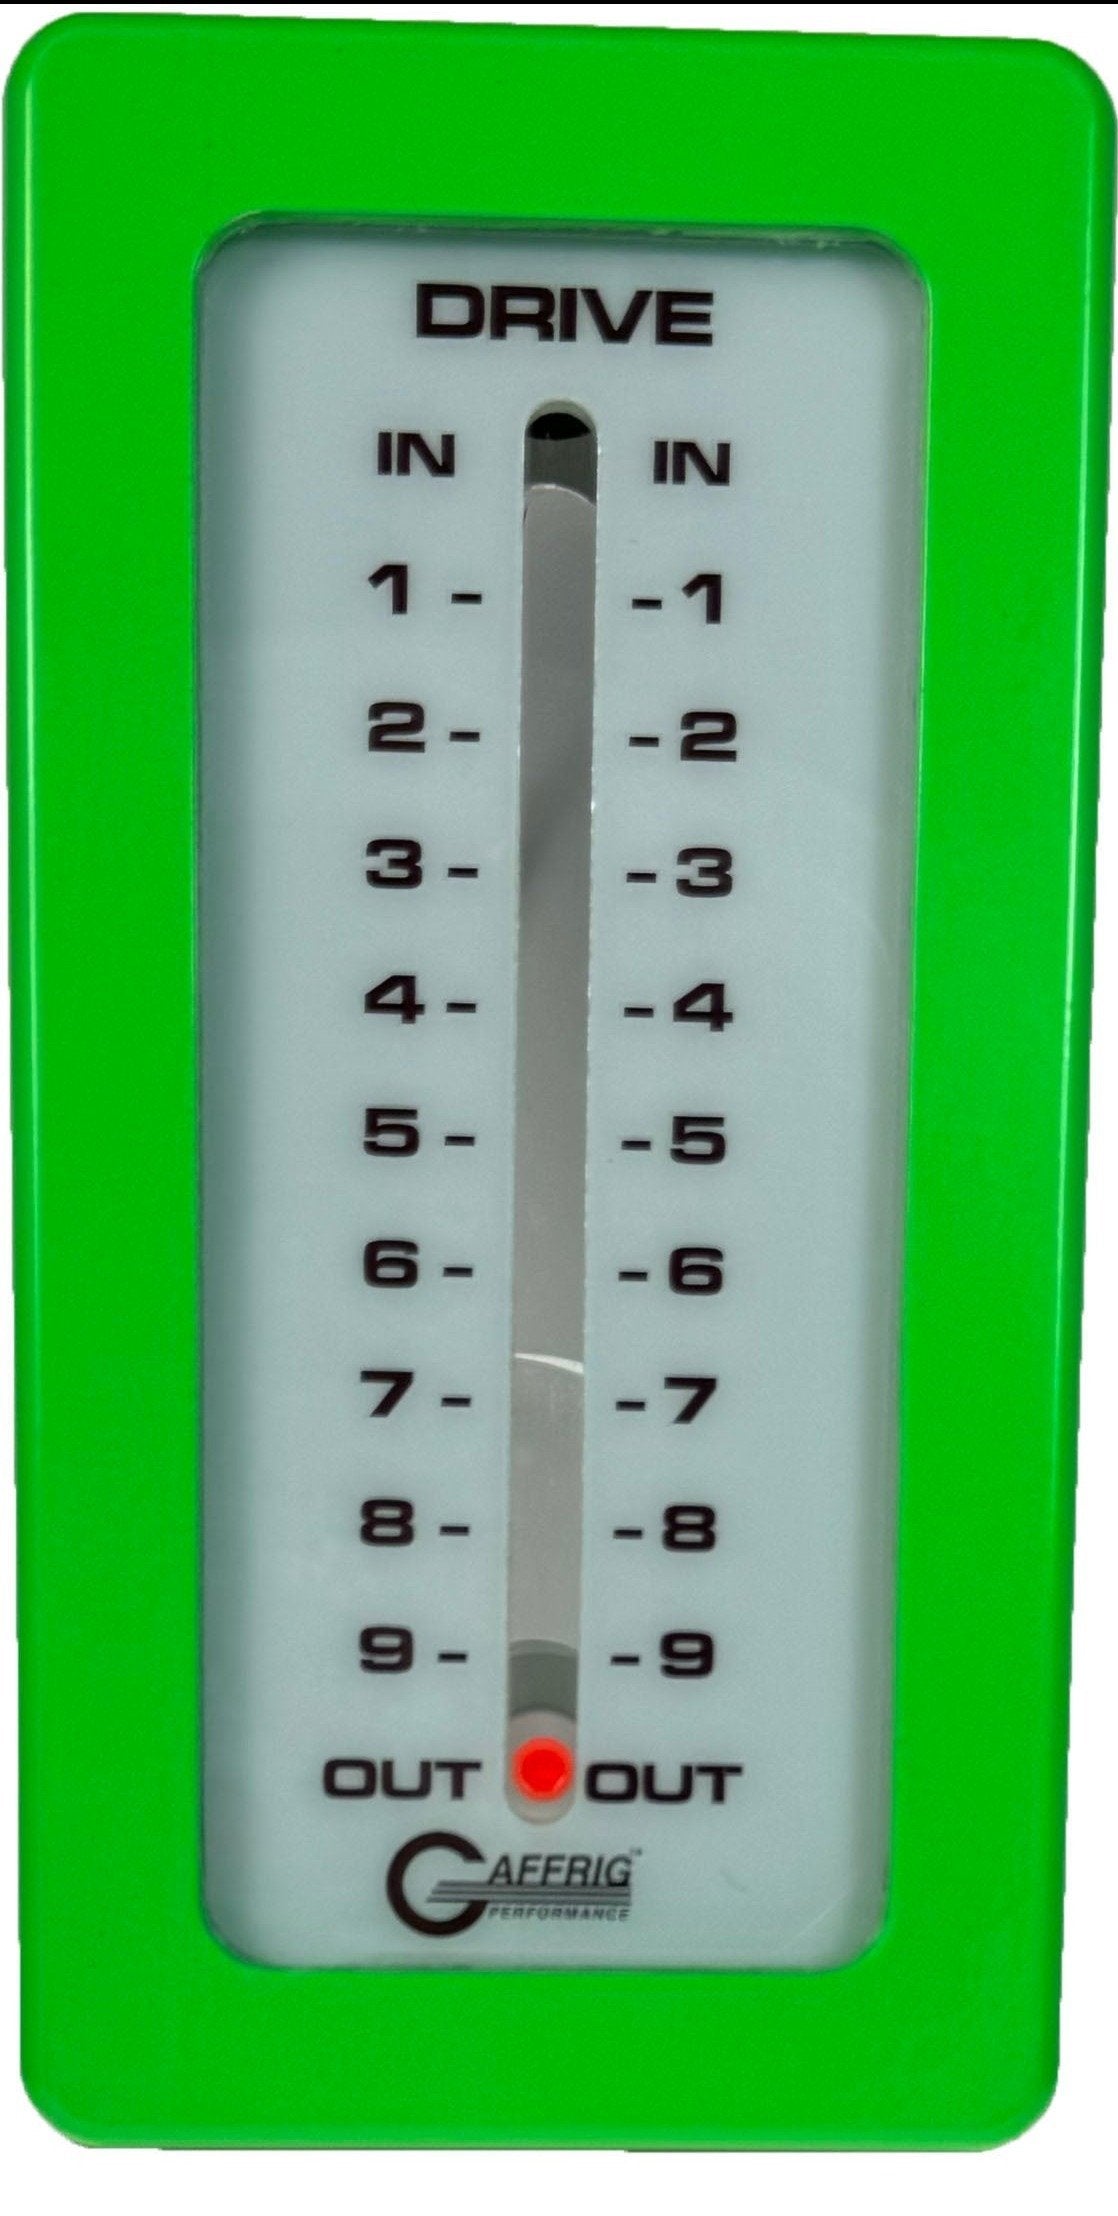 GAFFRIG PART #200 MECHANICAL INDICATOR, 1 DRIVE, MERCURY-CARD - WHITE DIAL LIME GREEN